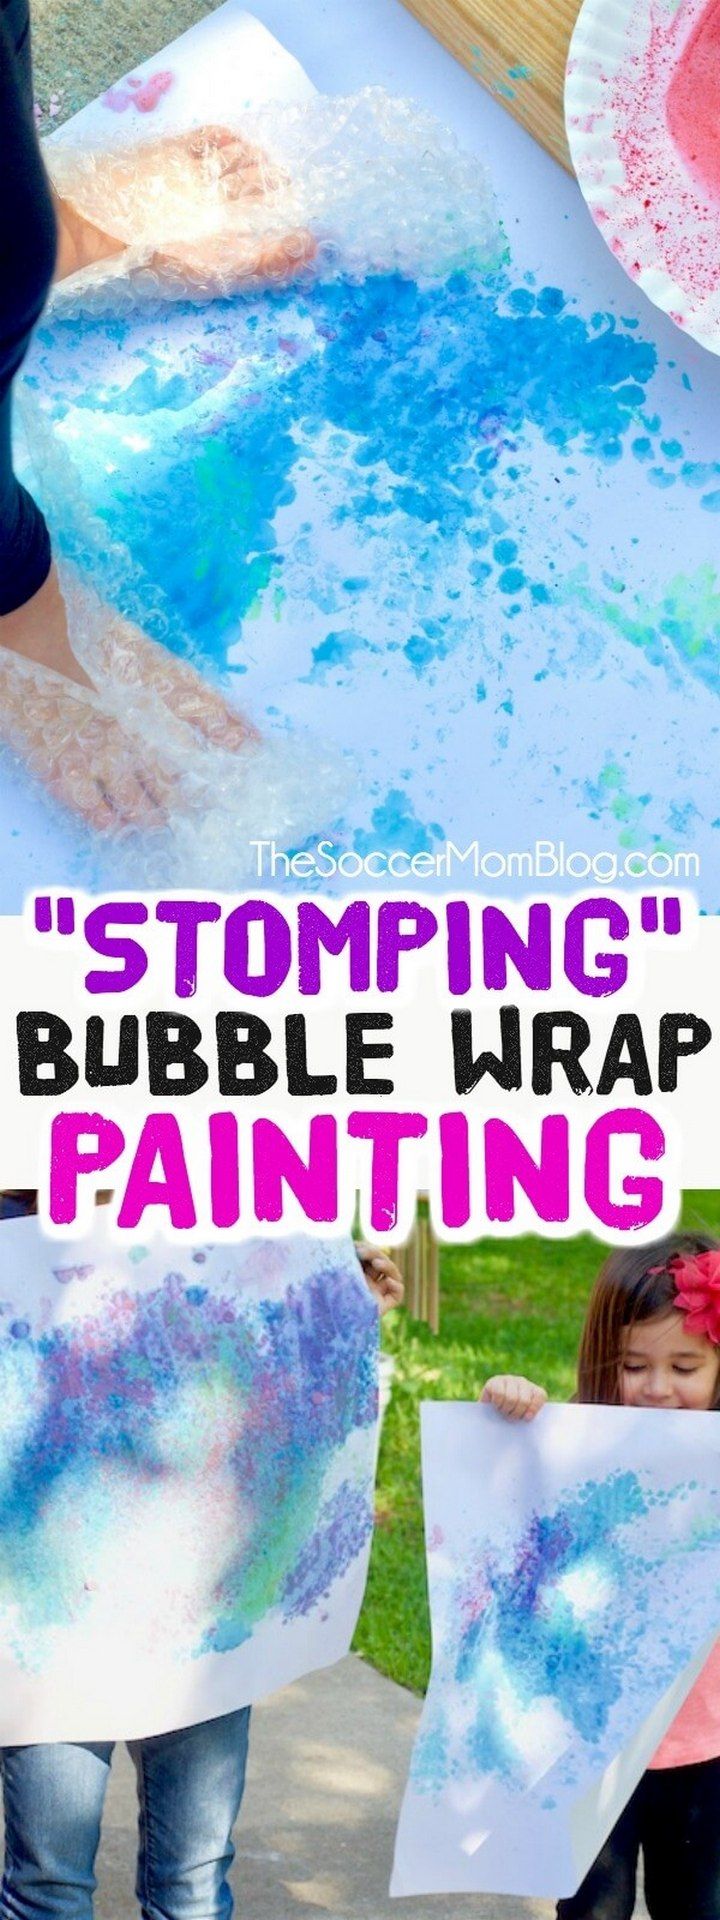 Stomping Bubble Wrap Painting